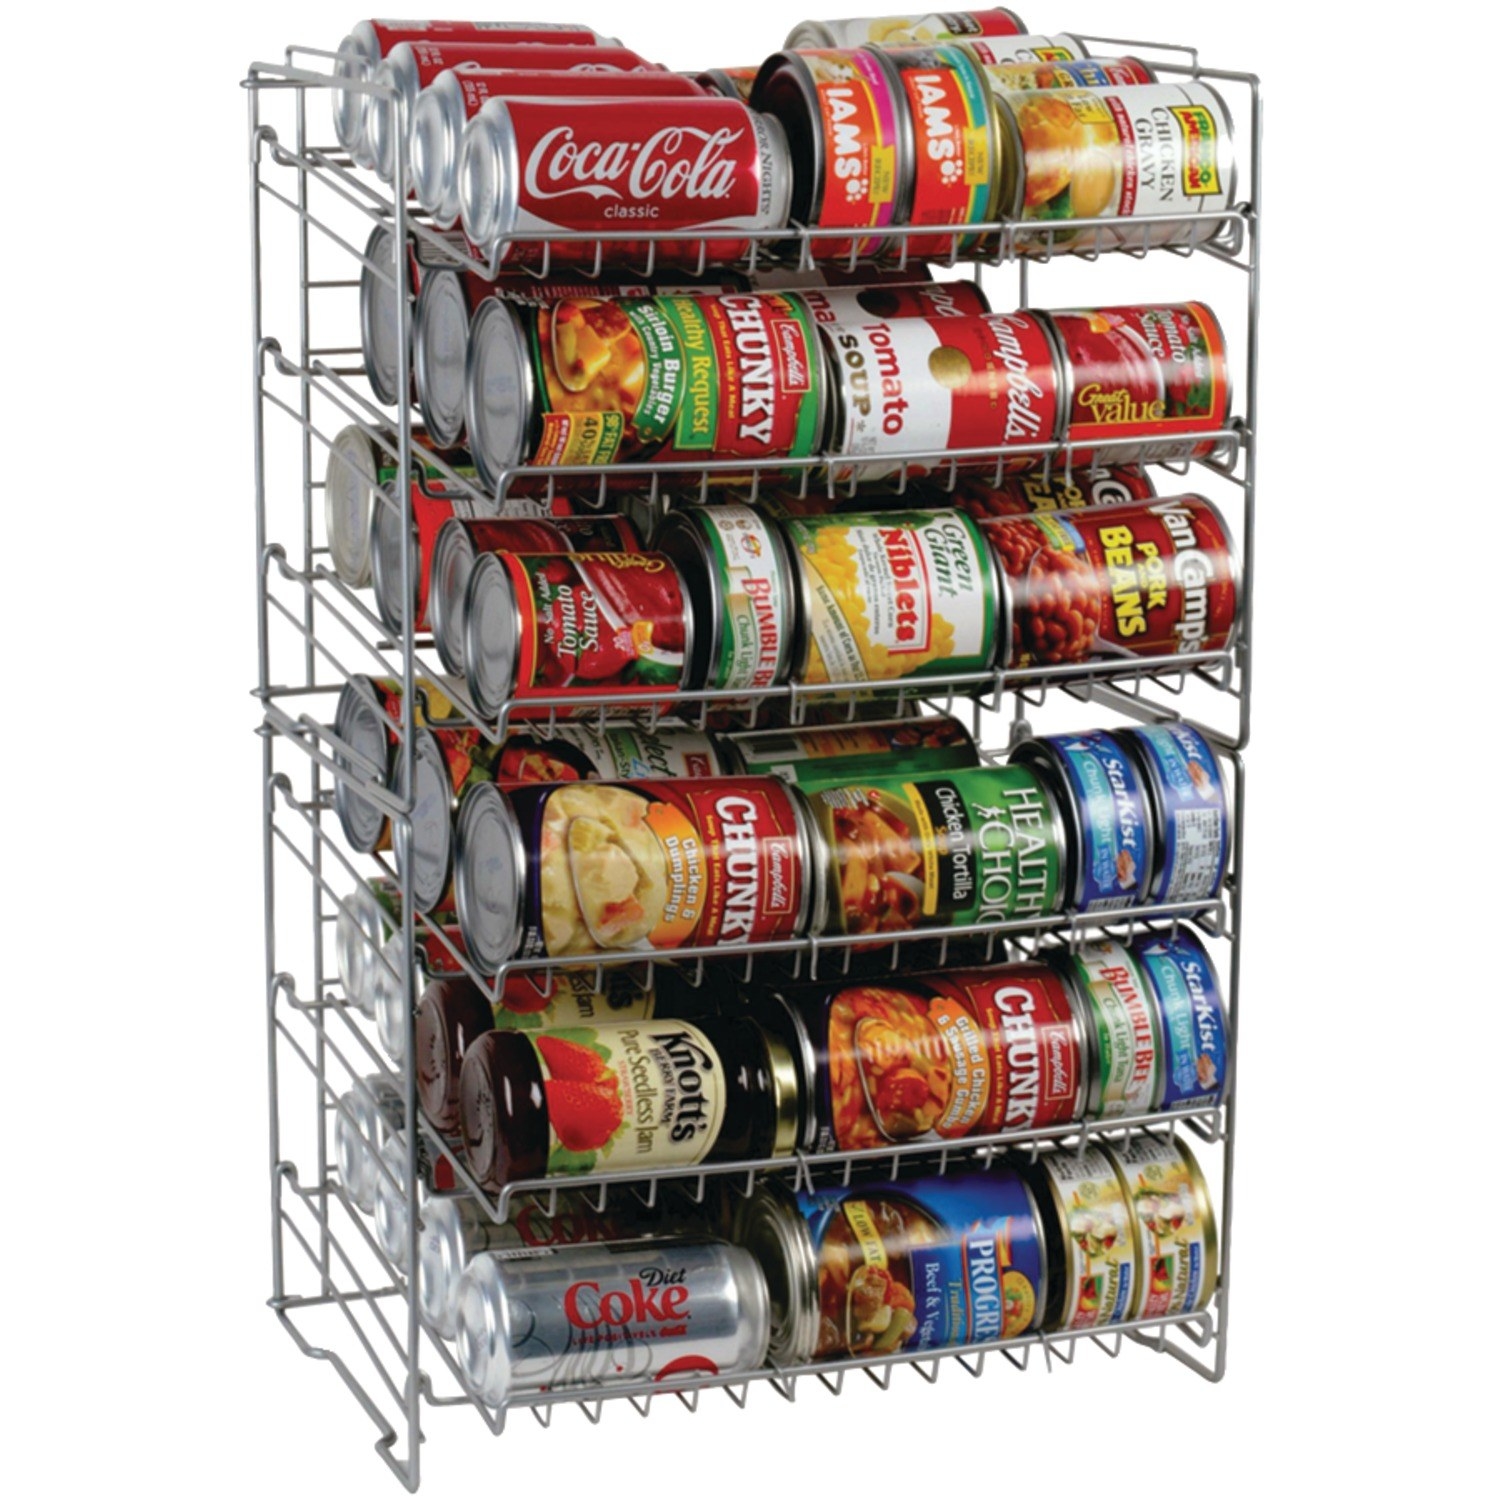 can rack with cans of soda, soup, and vegetables stacked on the shelves